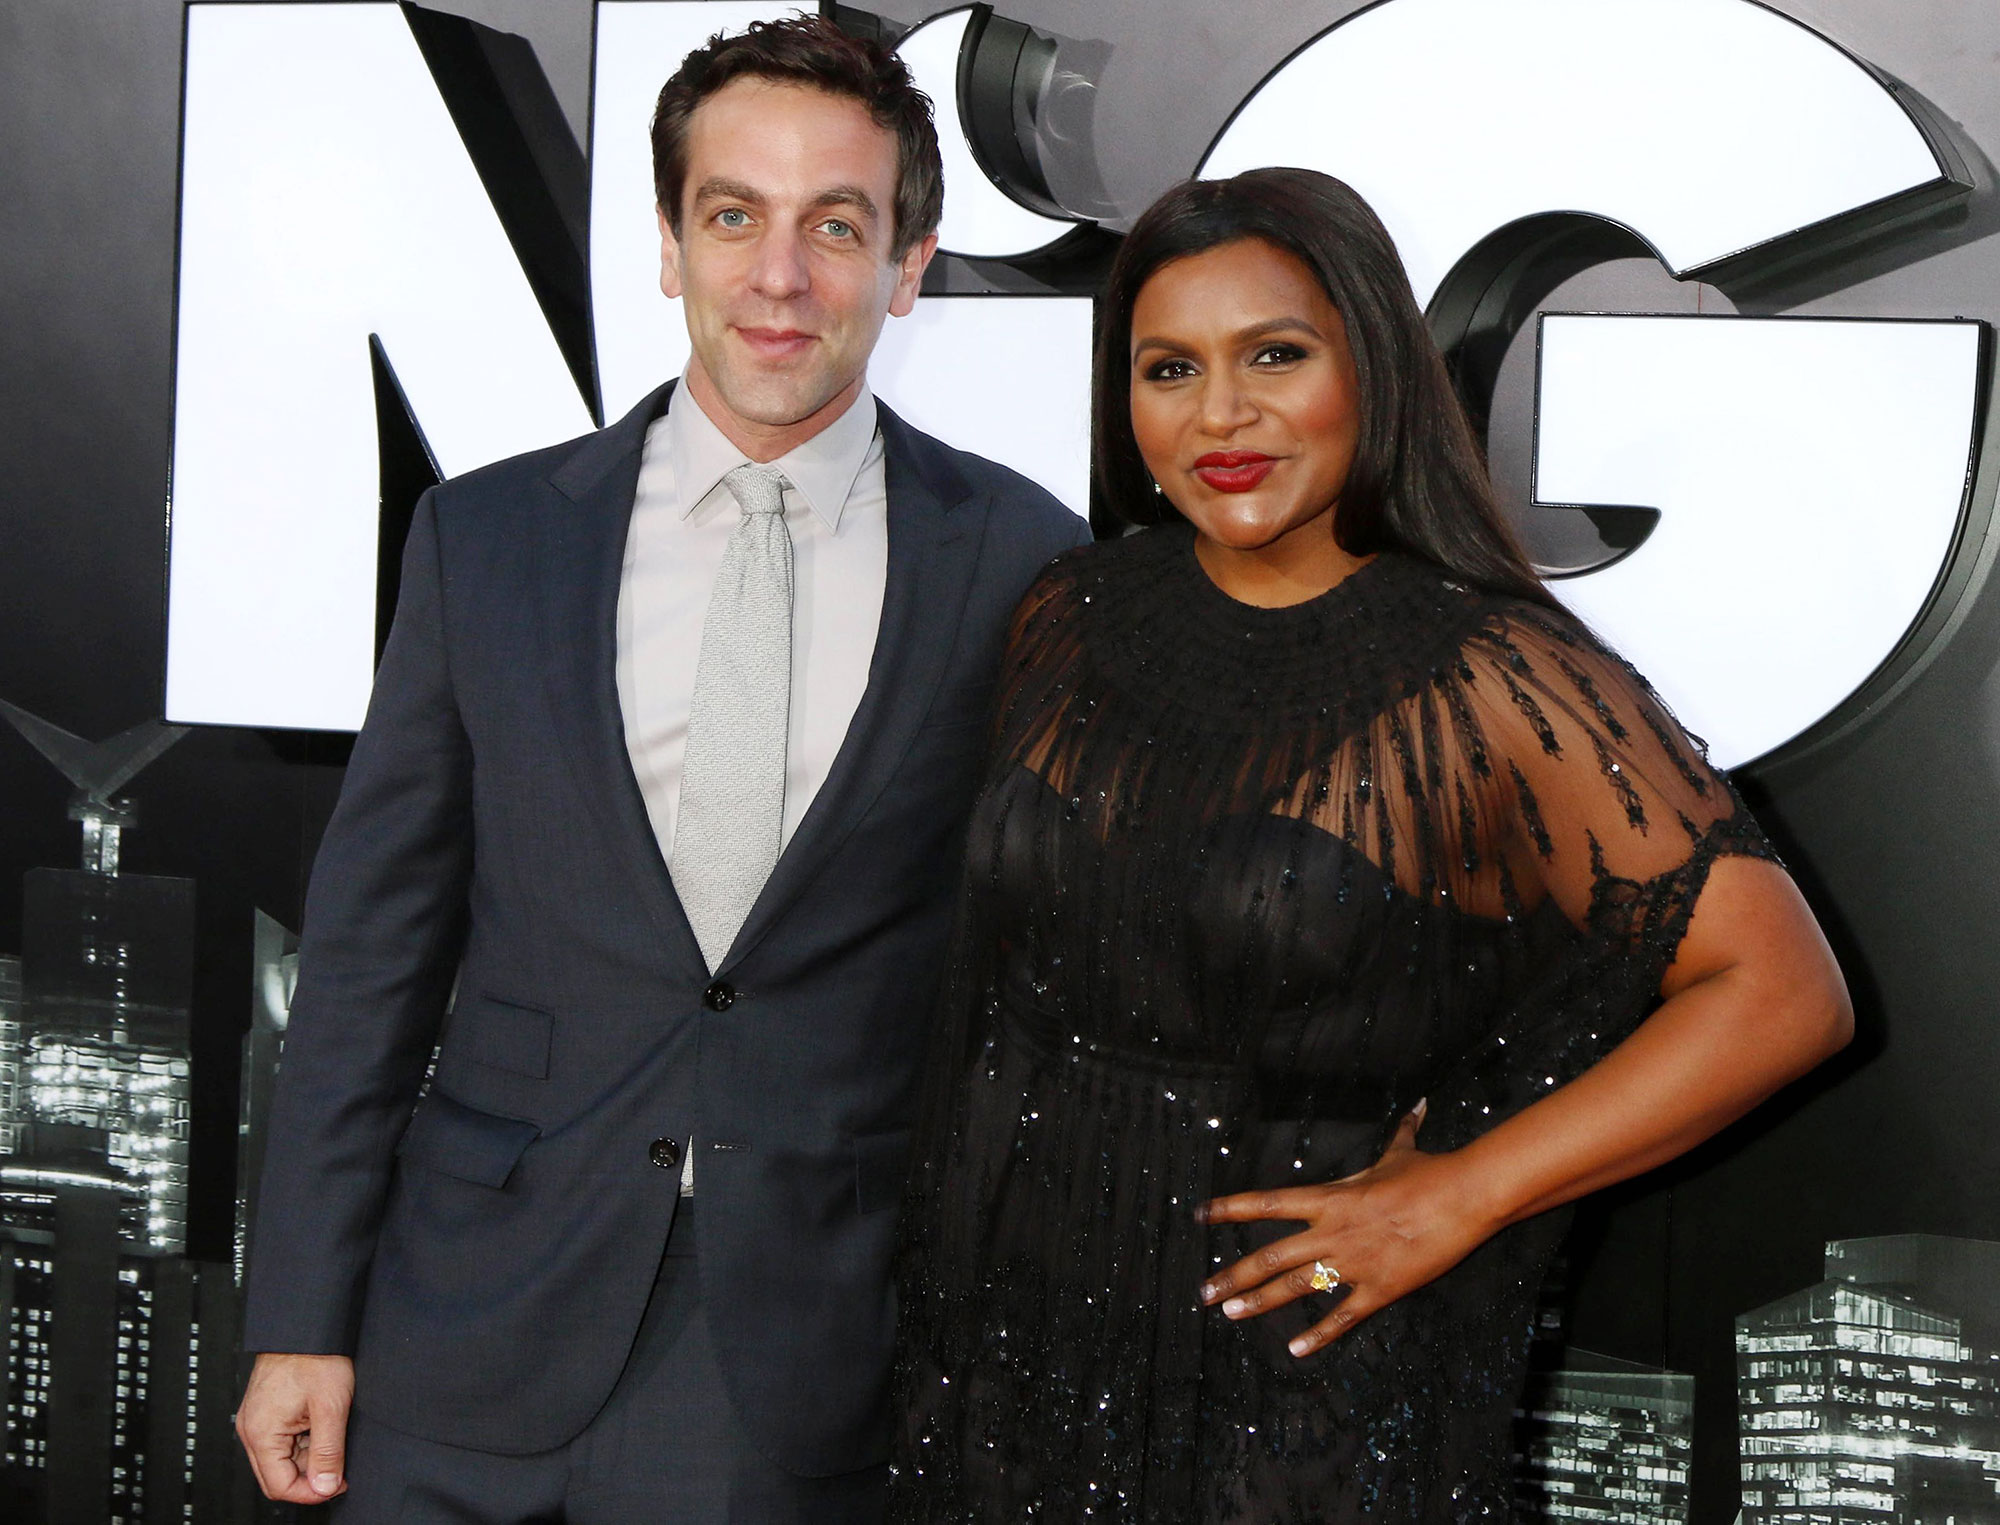 Mindy Kaling and BJ Novak Attend Red